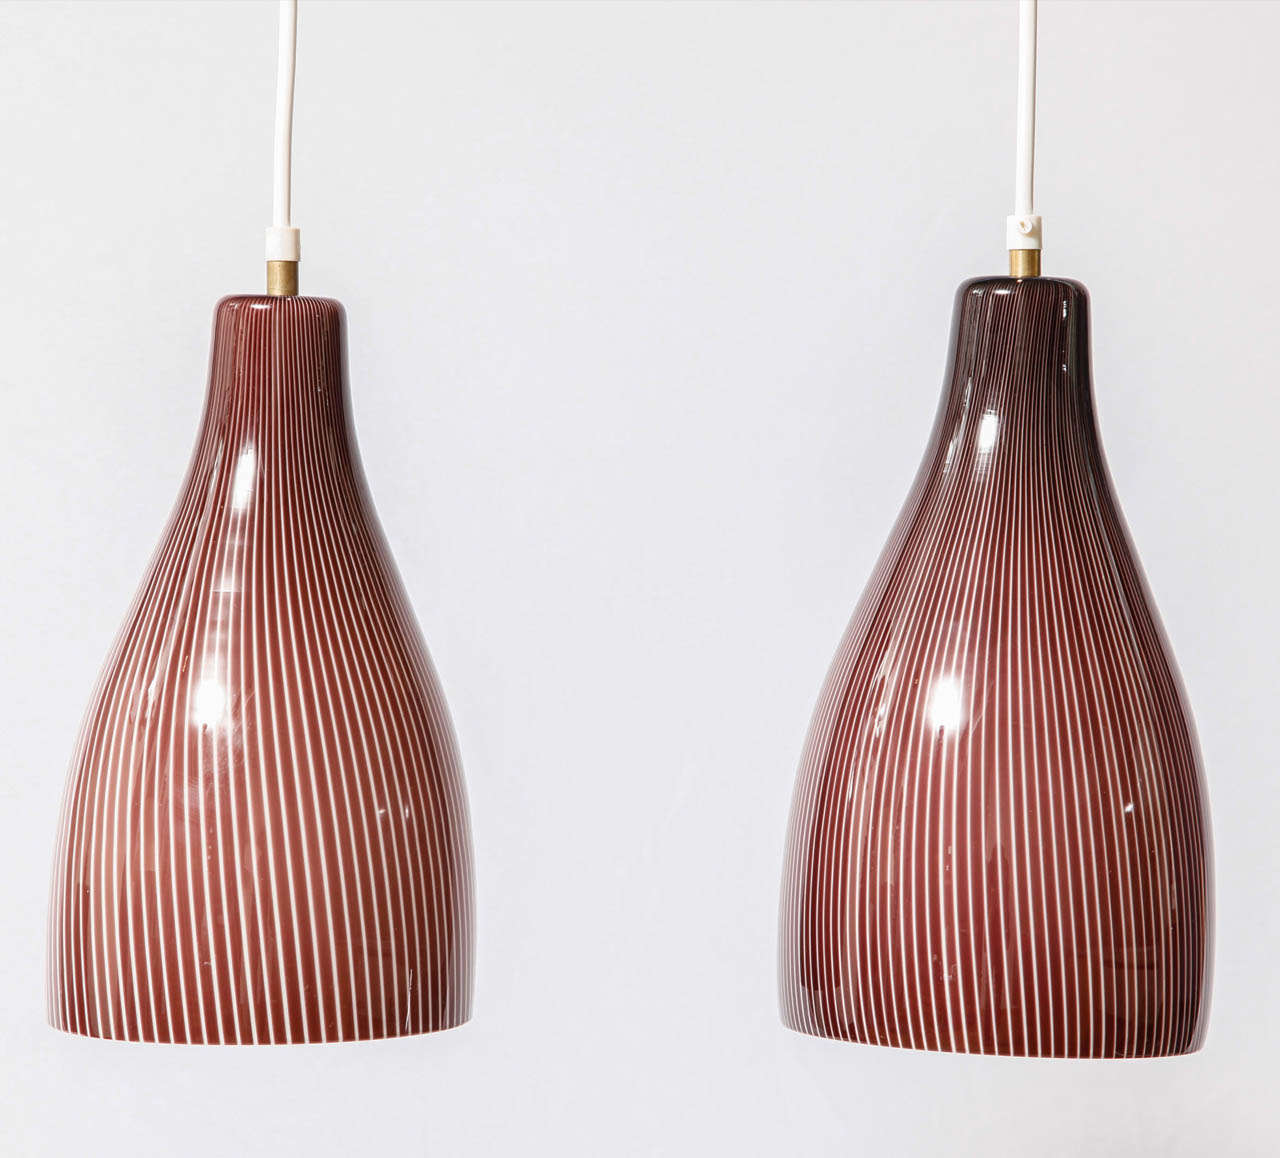 Rare set of four Tessuto pendant designed by Massimo Vignelli (1931-2014) and executed by Venini, glassworks in Murano, Italy.
Venini period label on one 'shade' (see image 6).
Lightly twisted white and purple stripes on an inner white opaque glass.